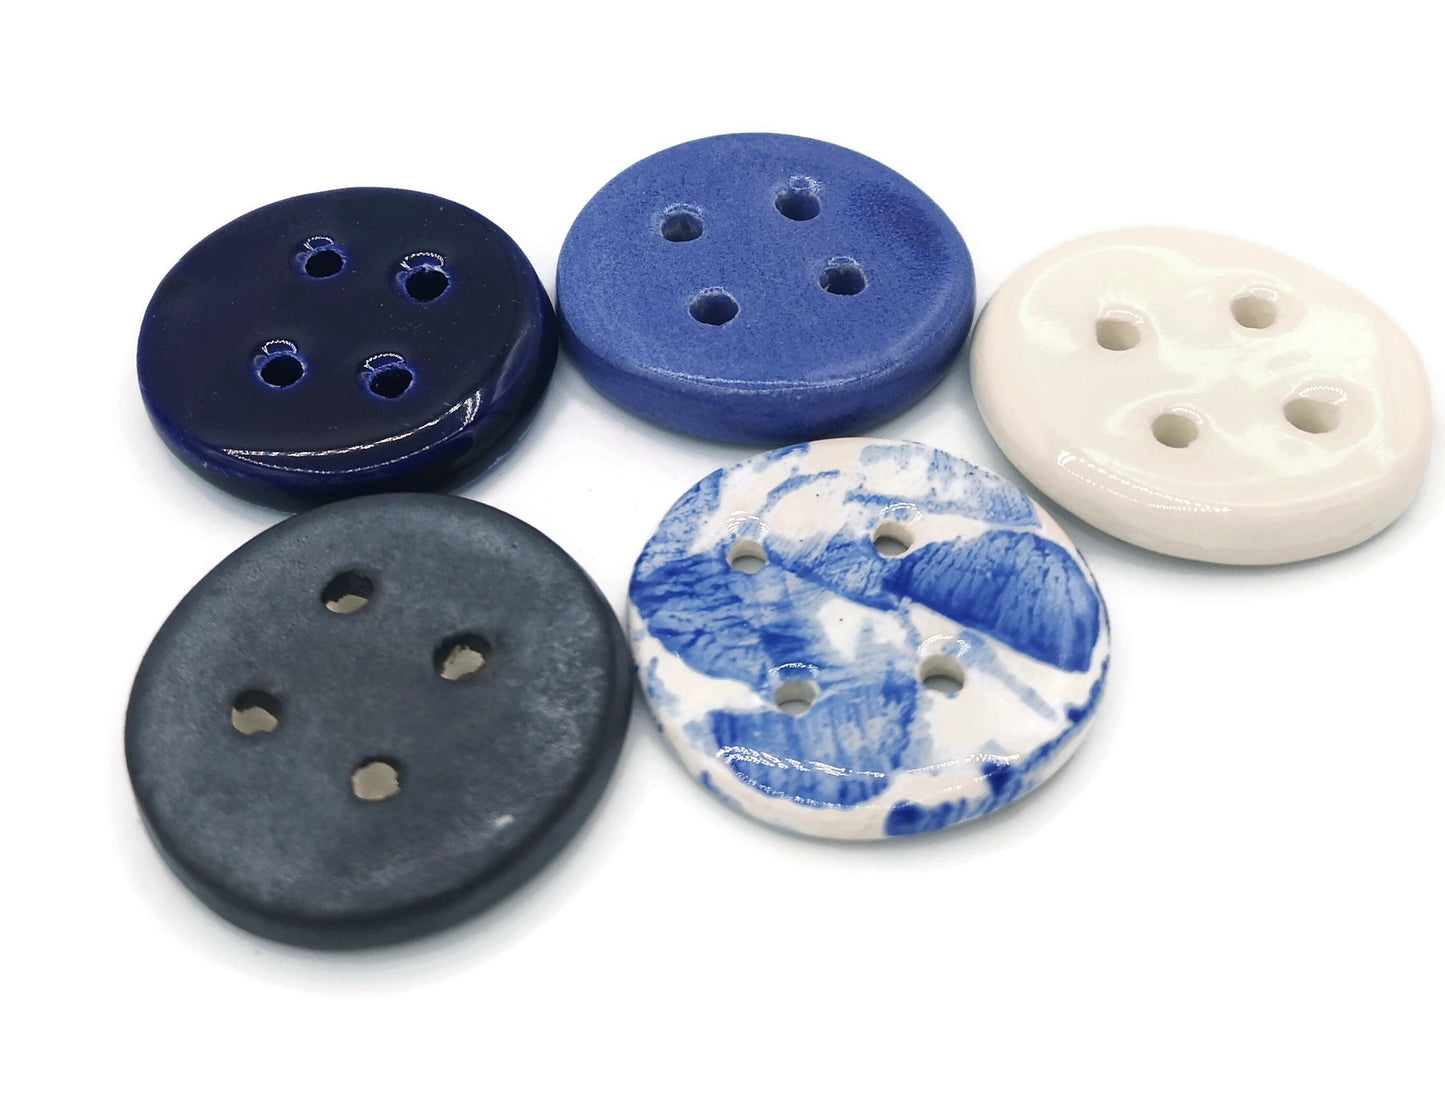 5Pc 40mm Round Sewing Buttons, Handmade Ceramic Unique Coat Buttons Set, Blue Sewing Button For Jewelry Making, Sewing Supplies And Notions - Ceramica Ana Rafael